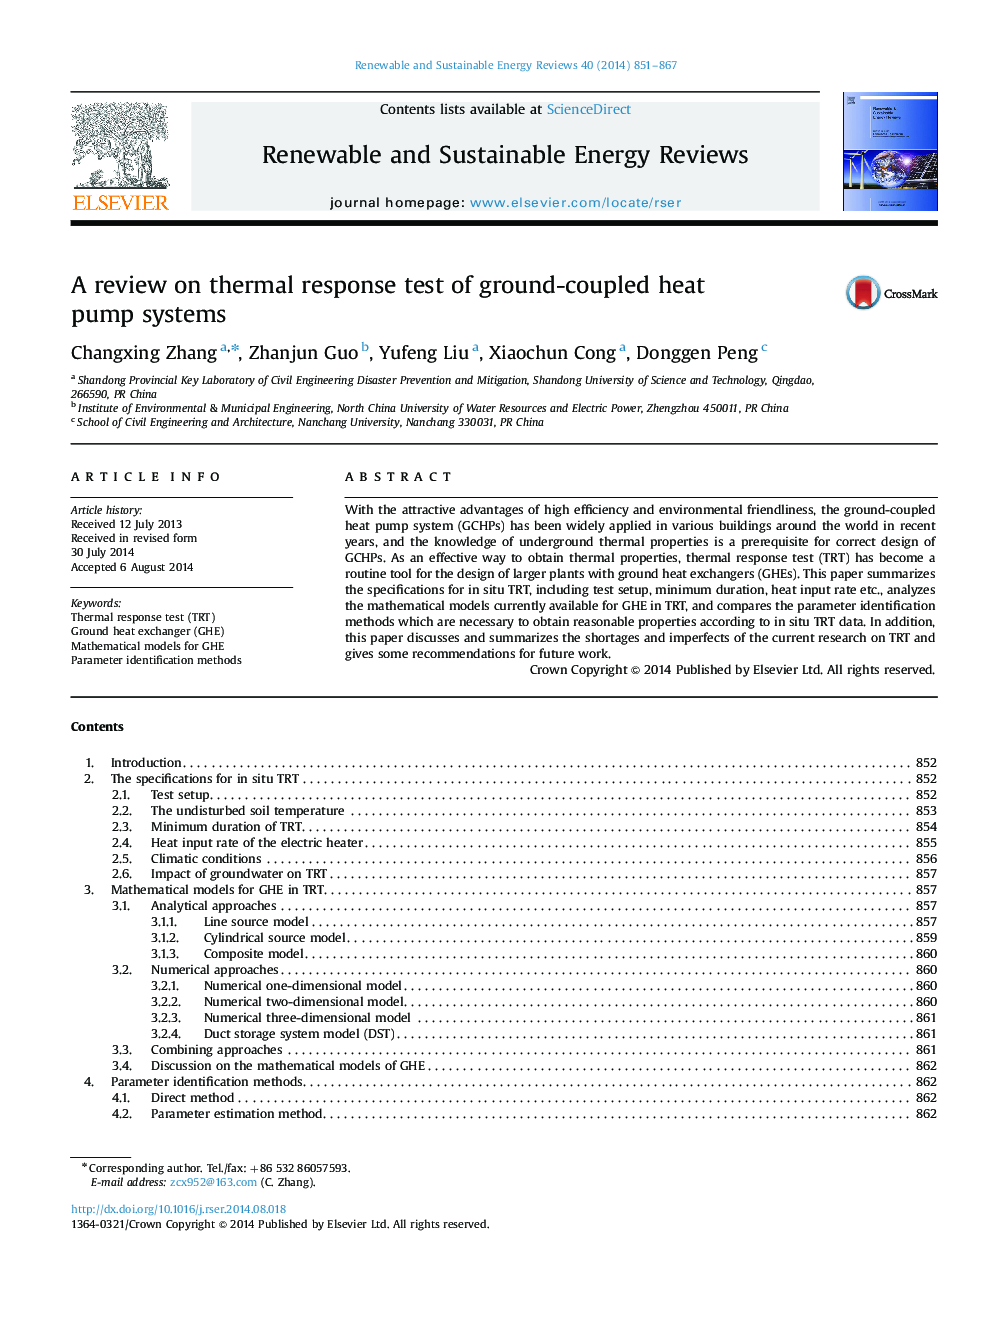 A review on thermal response test of ground-coupled heat pump systems